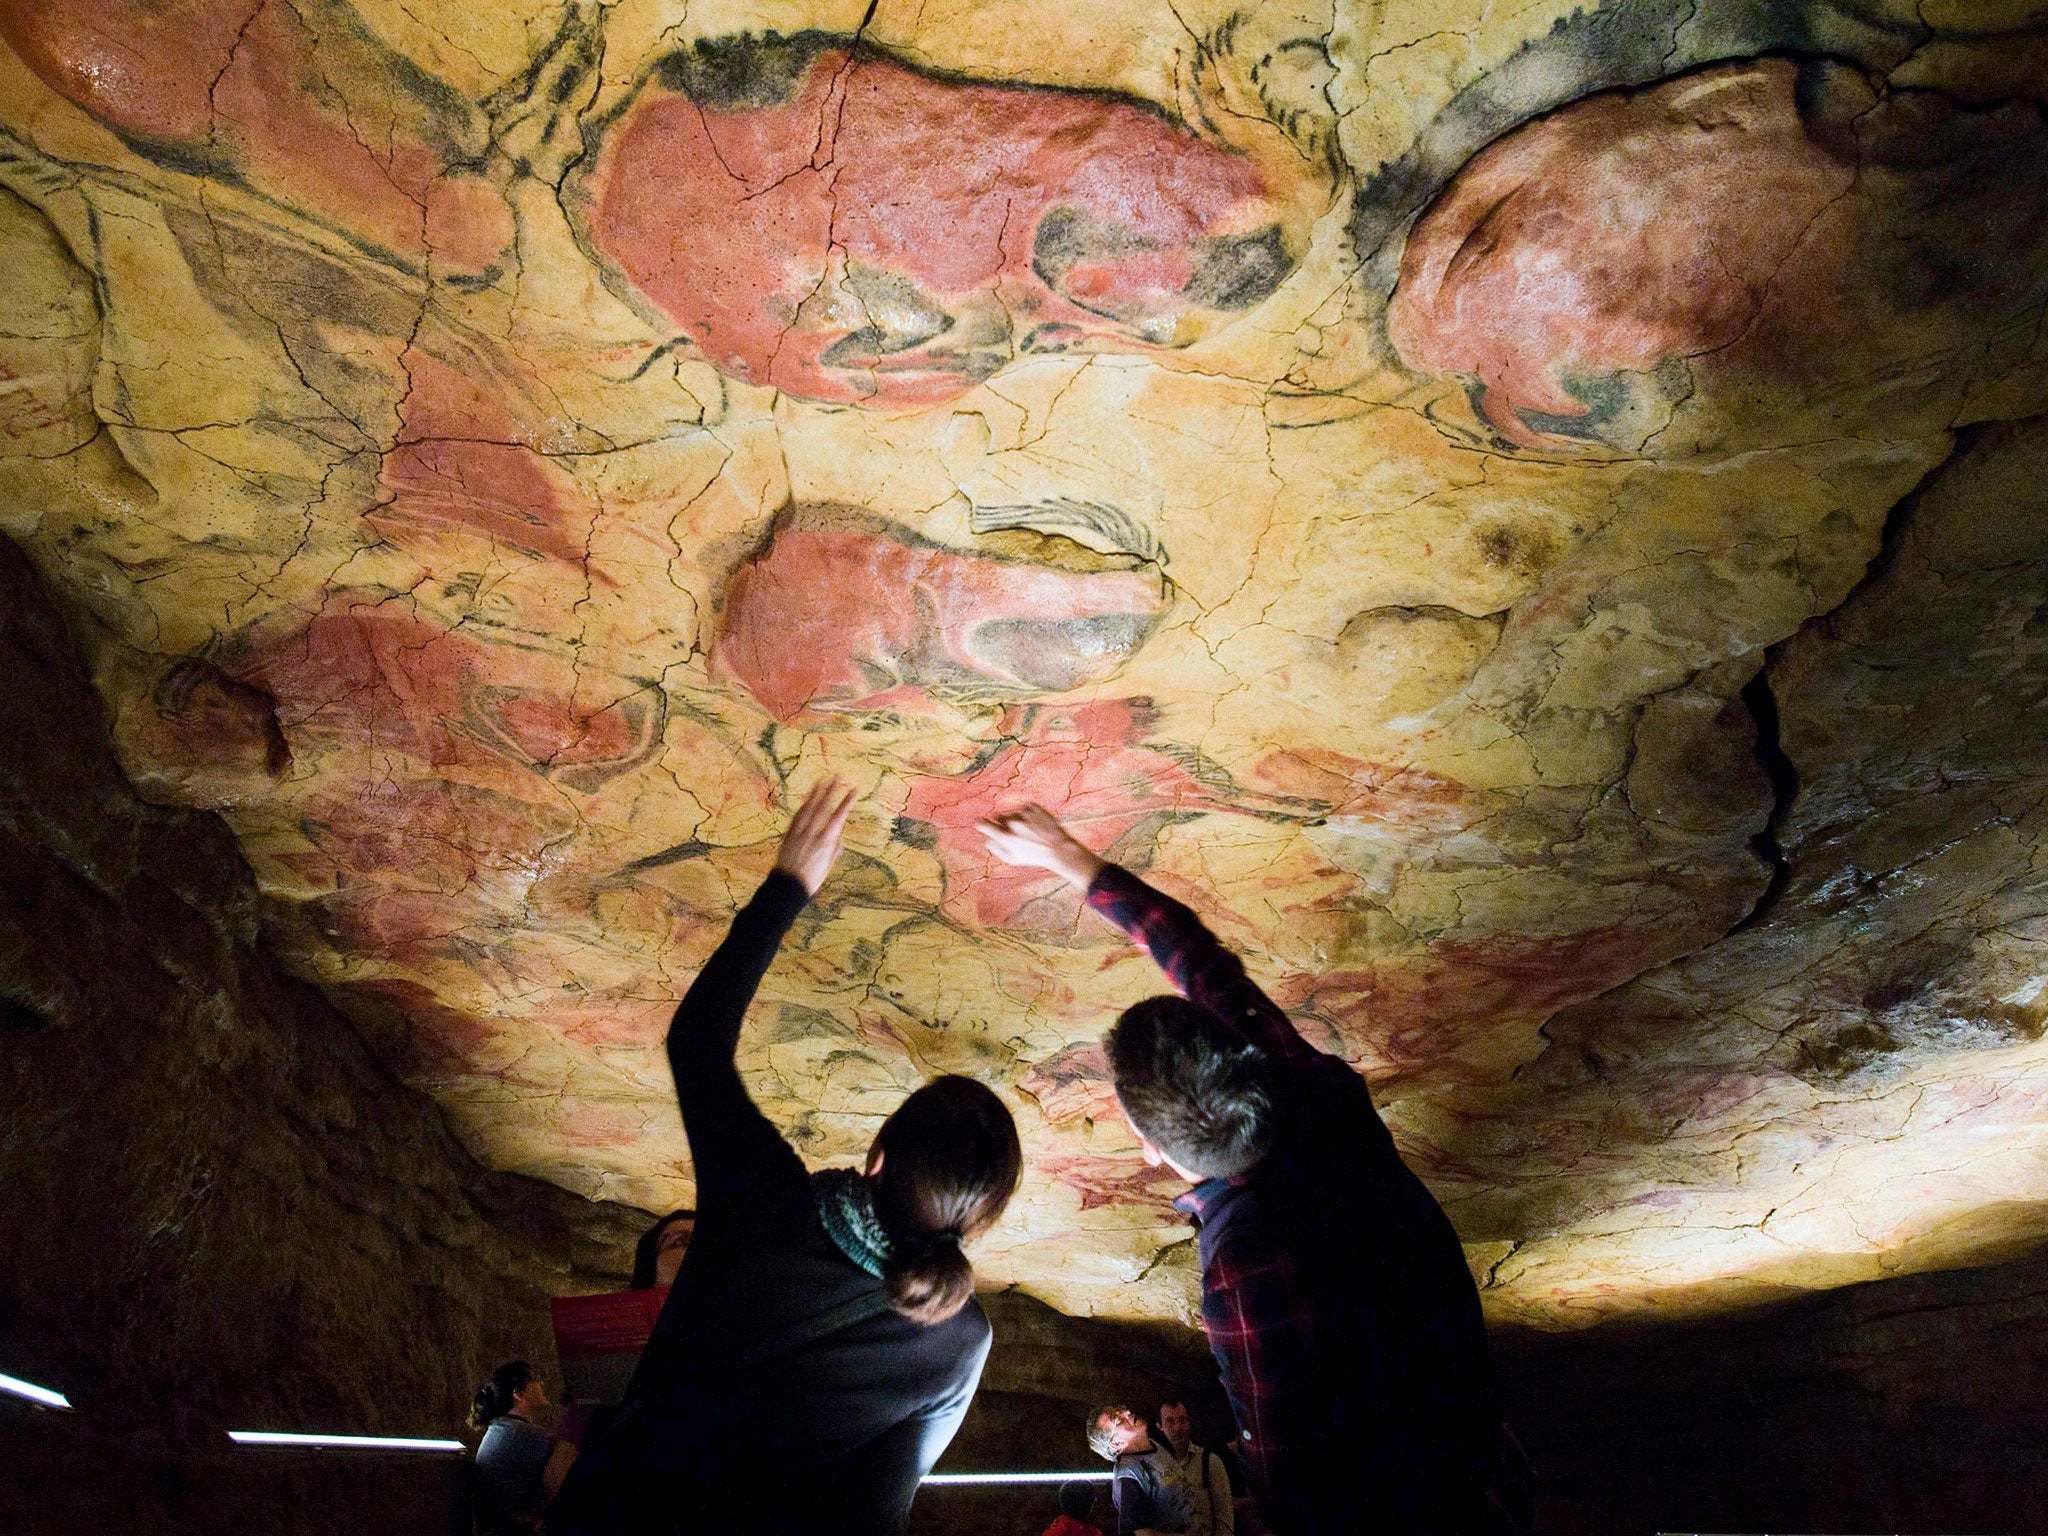 Tourists observe the drawings in the replica of the cave of Altamira near Santander, northern Spain